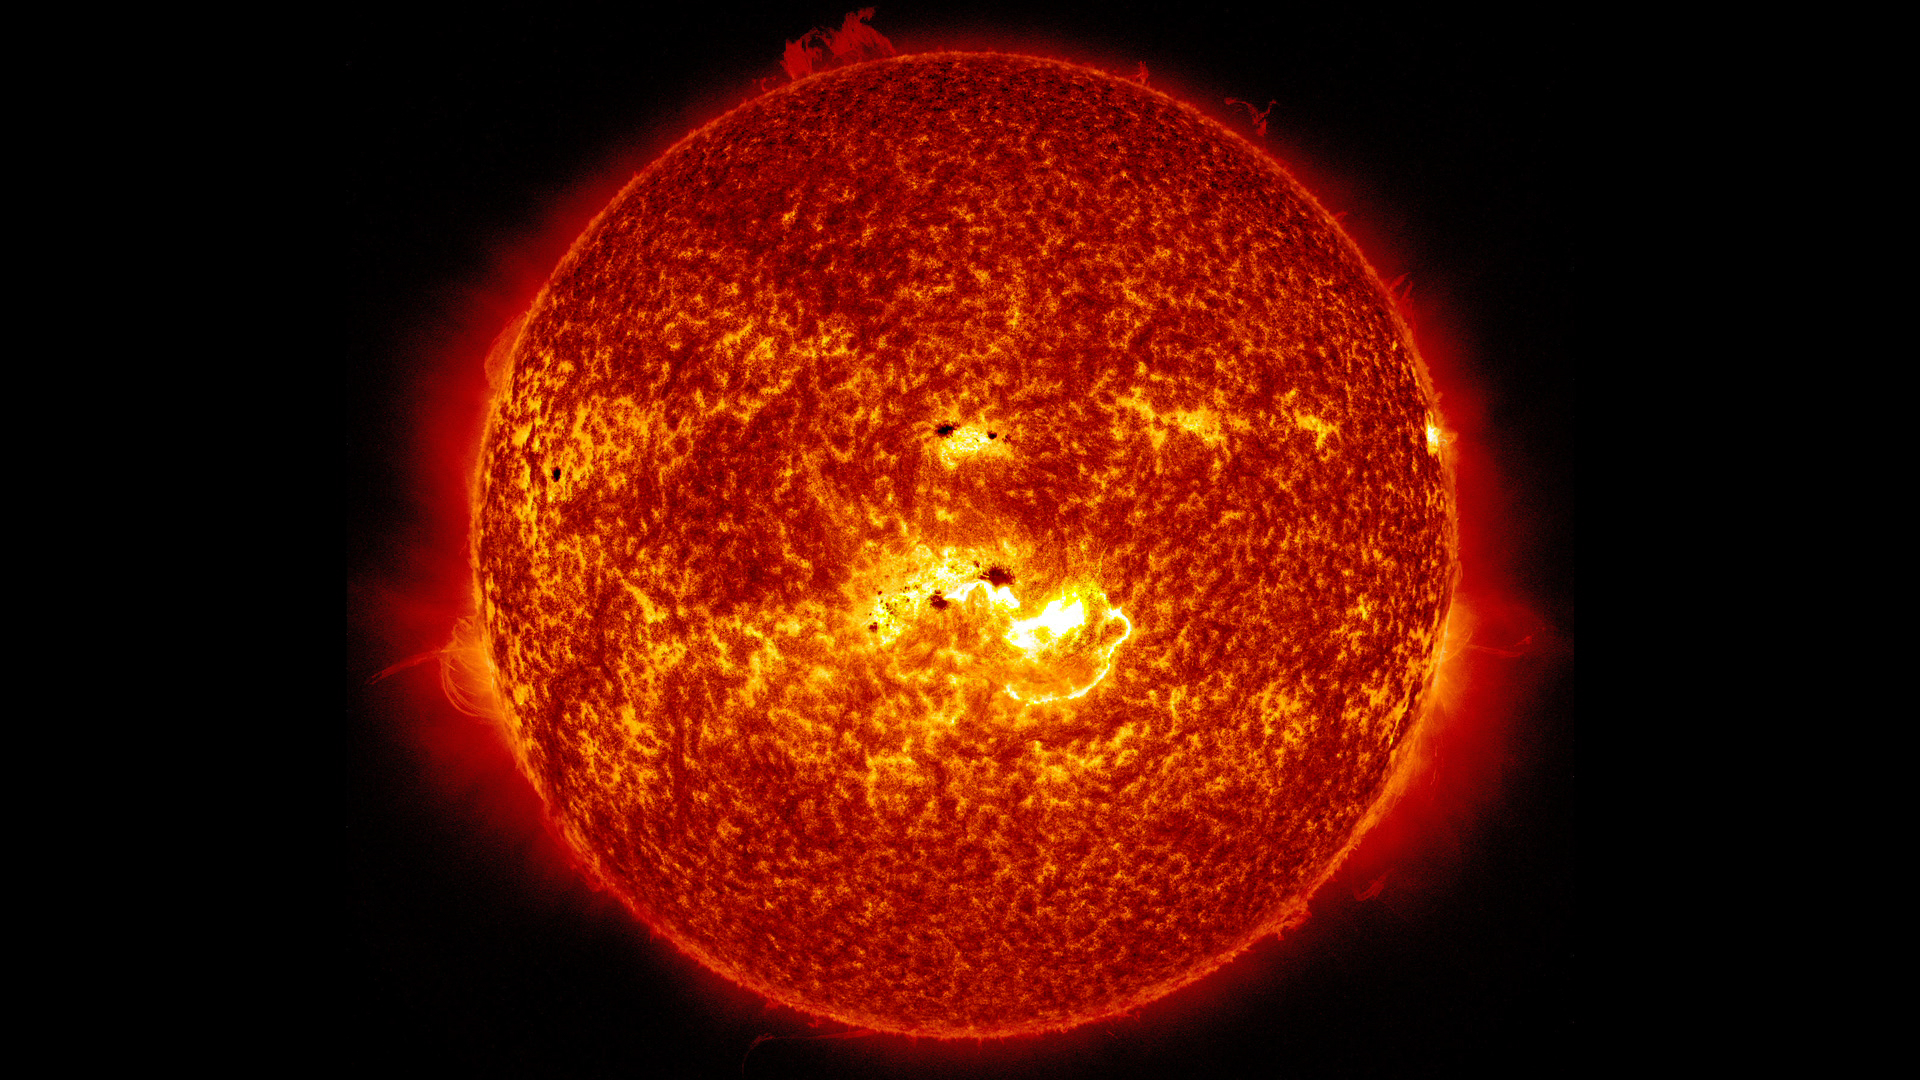 Preview Image for NASA On Air: NASA Spacecraft Observes Solar Flare (3/13/2014)